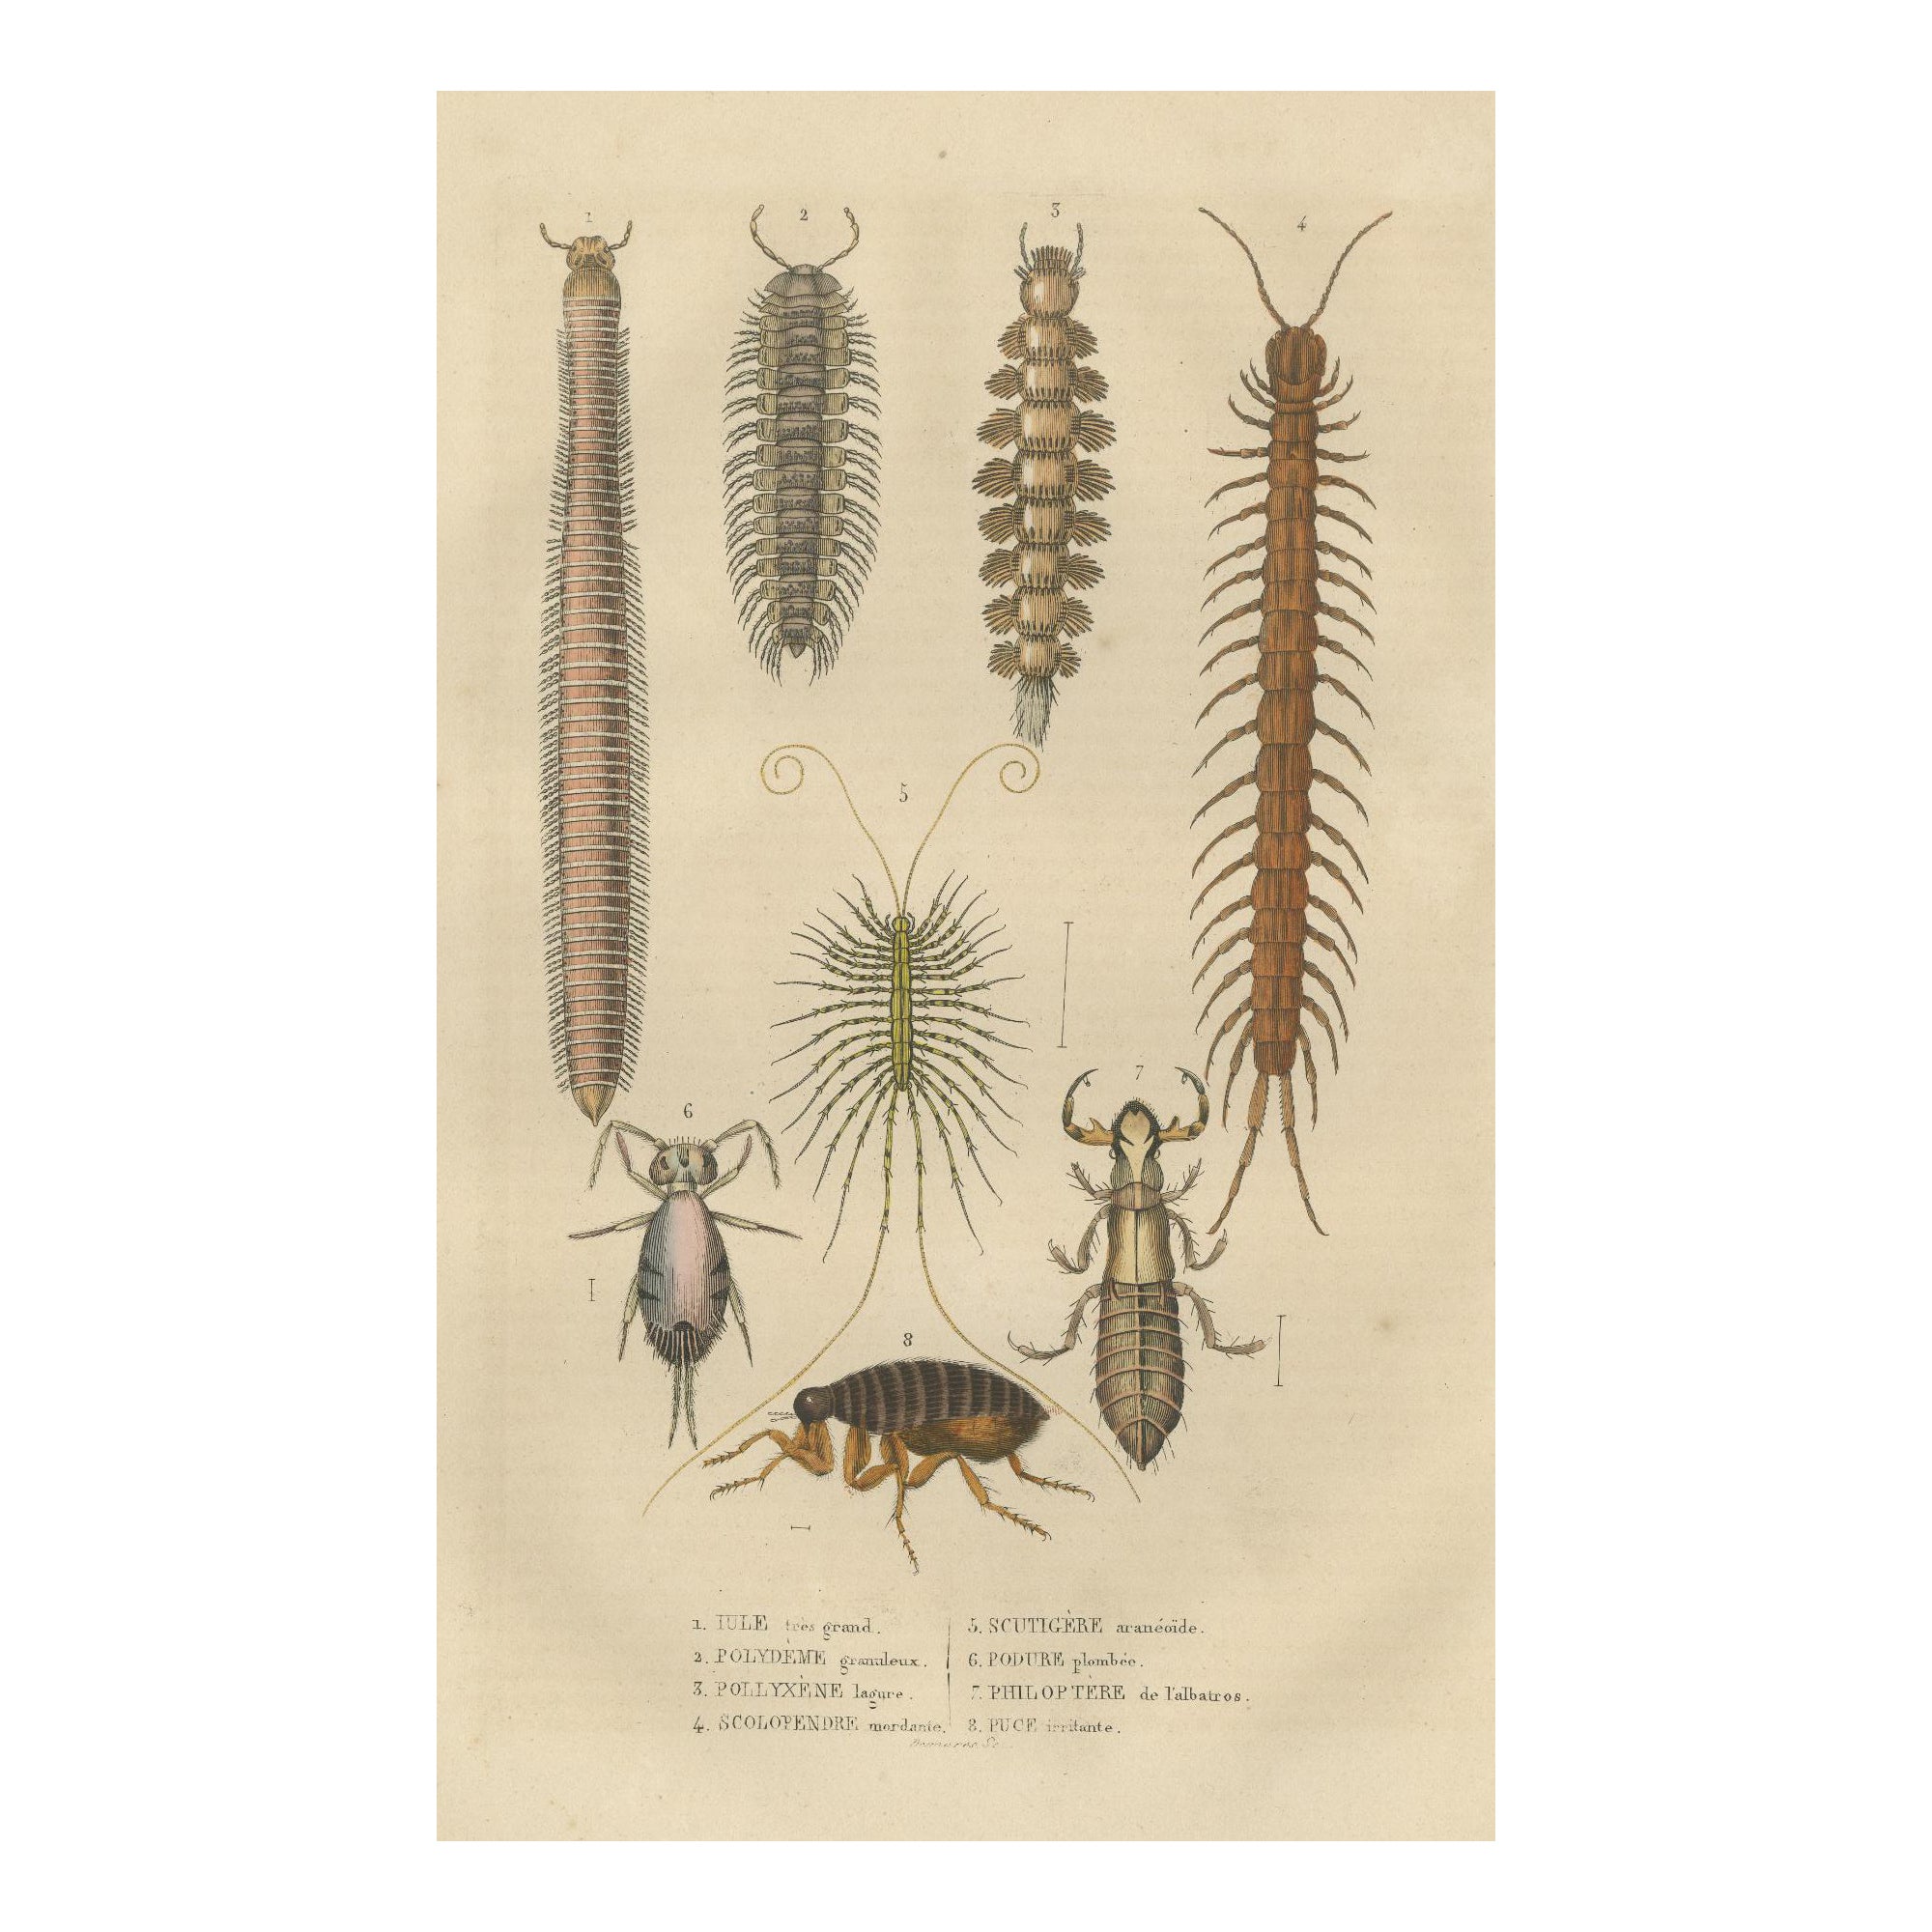 1845 Scientific Art: Handcolored Engraving of Marine Invertebrates and Insects For Sale